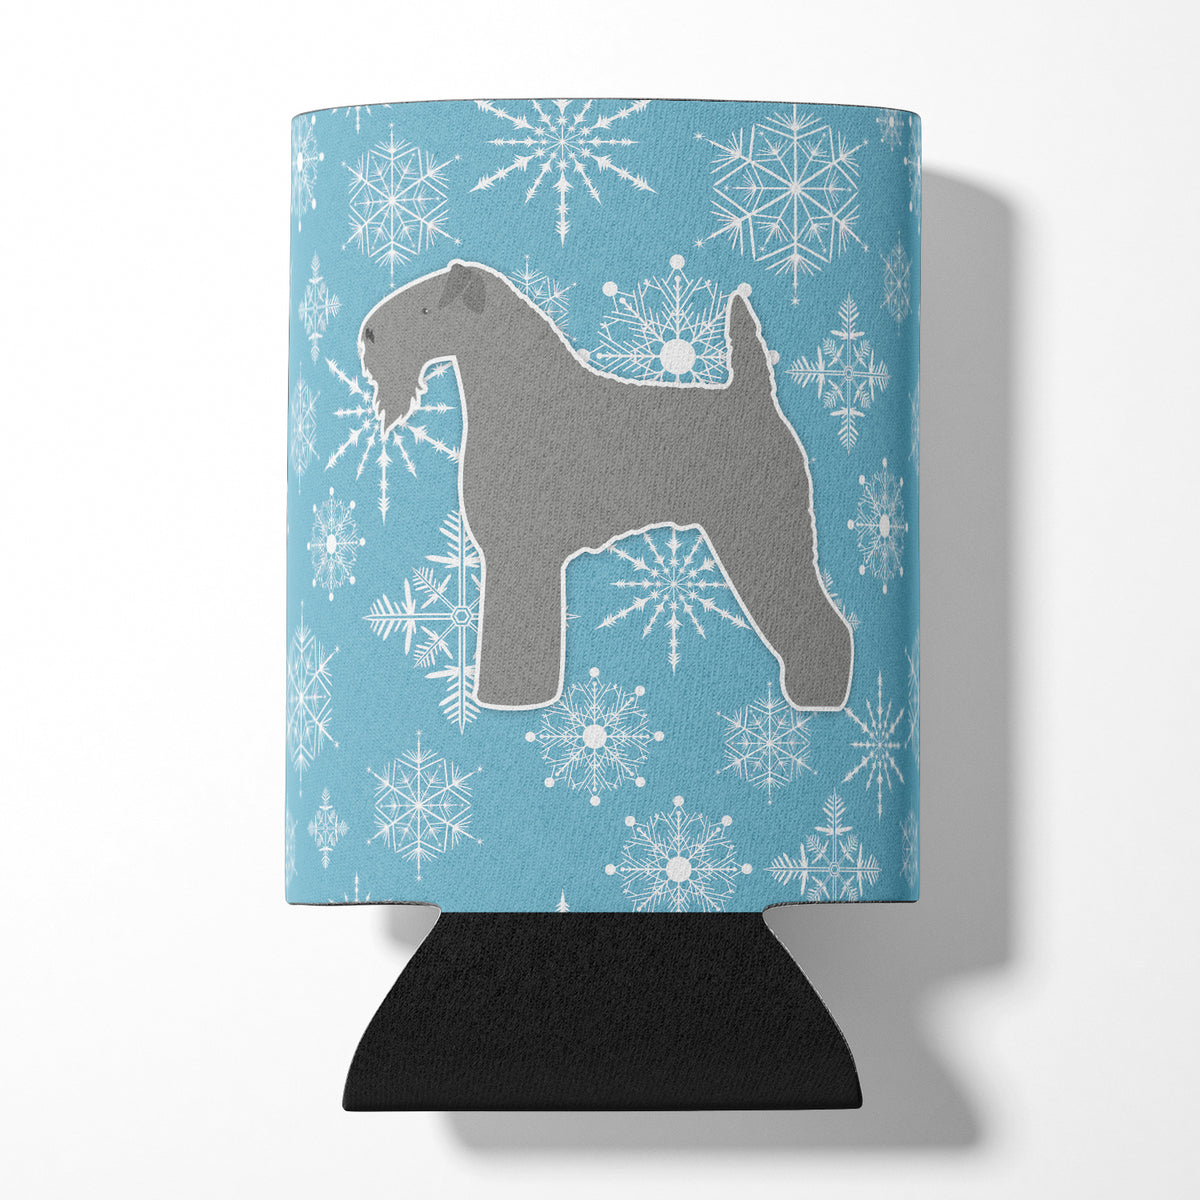 Winter Snowflake Kerry Blue Terrier Can or Bottle Hugger BB3492CC  the-store.com.